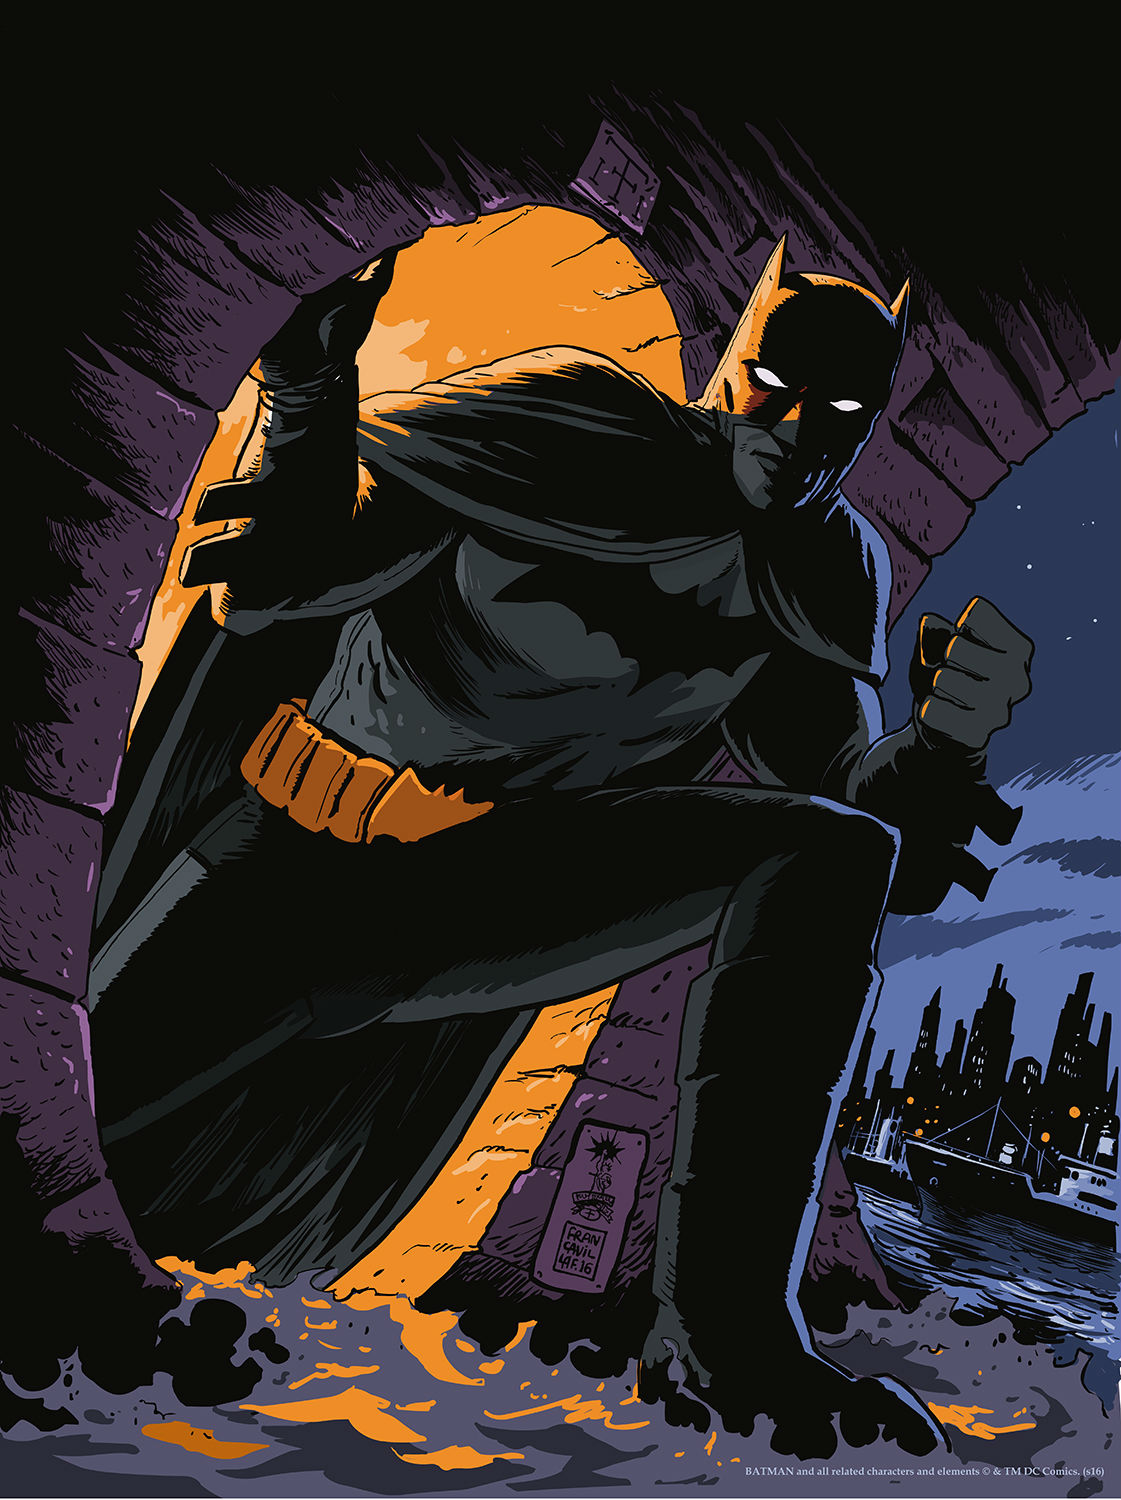 The Incredible Comic Art Of Francesco Francavilla Is Going On Display